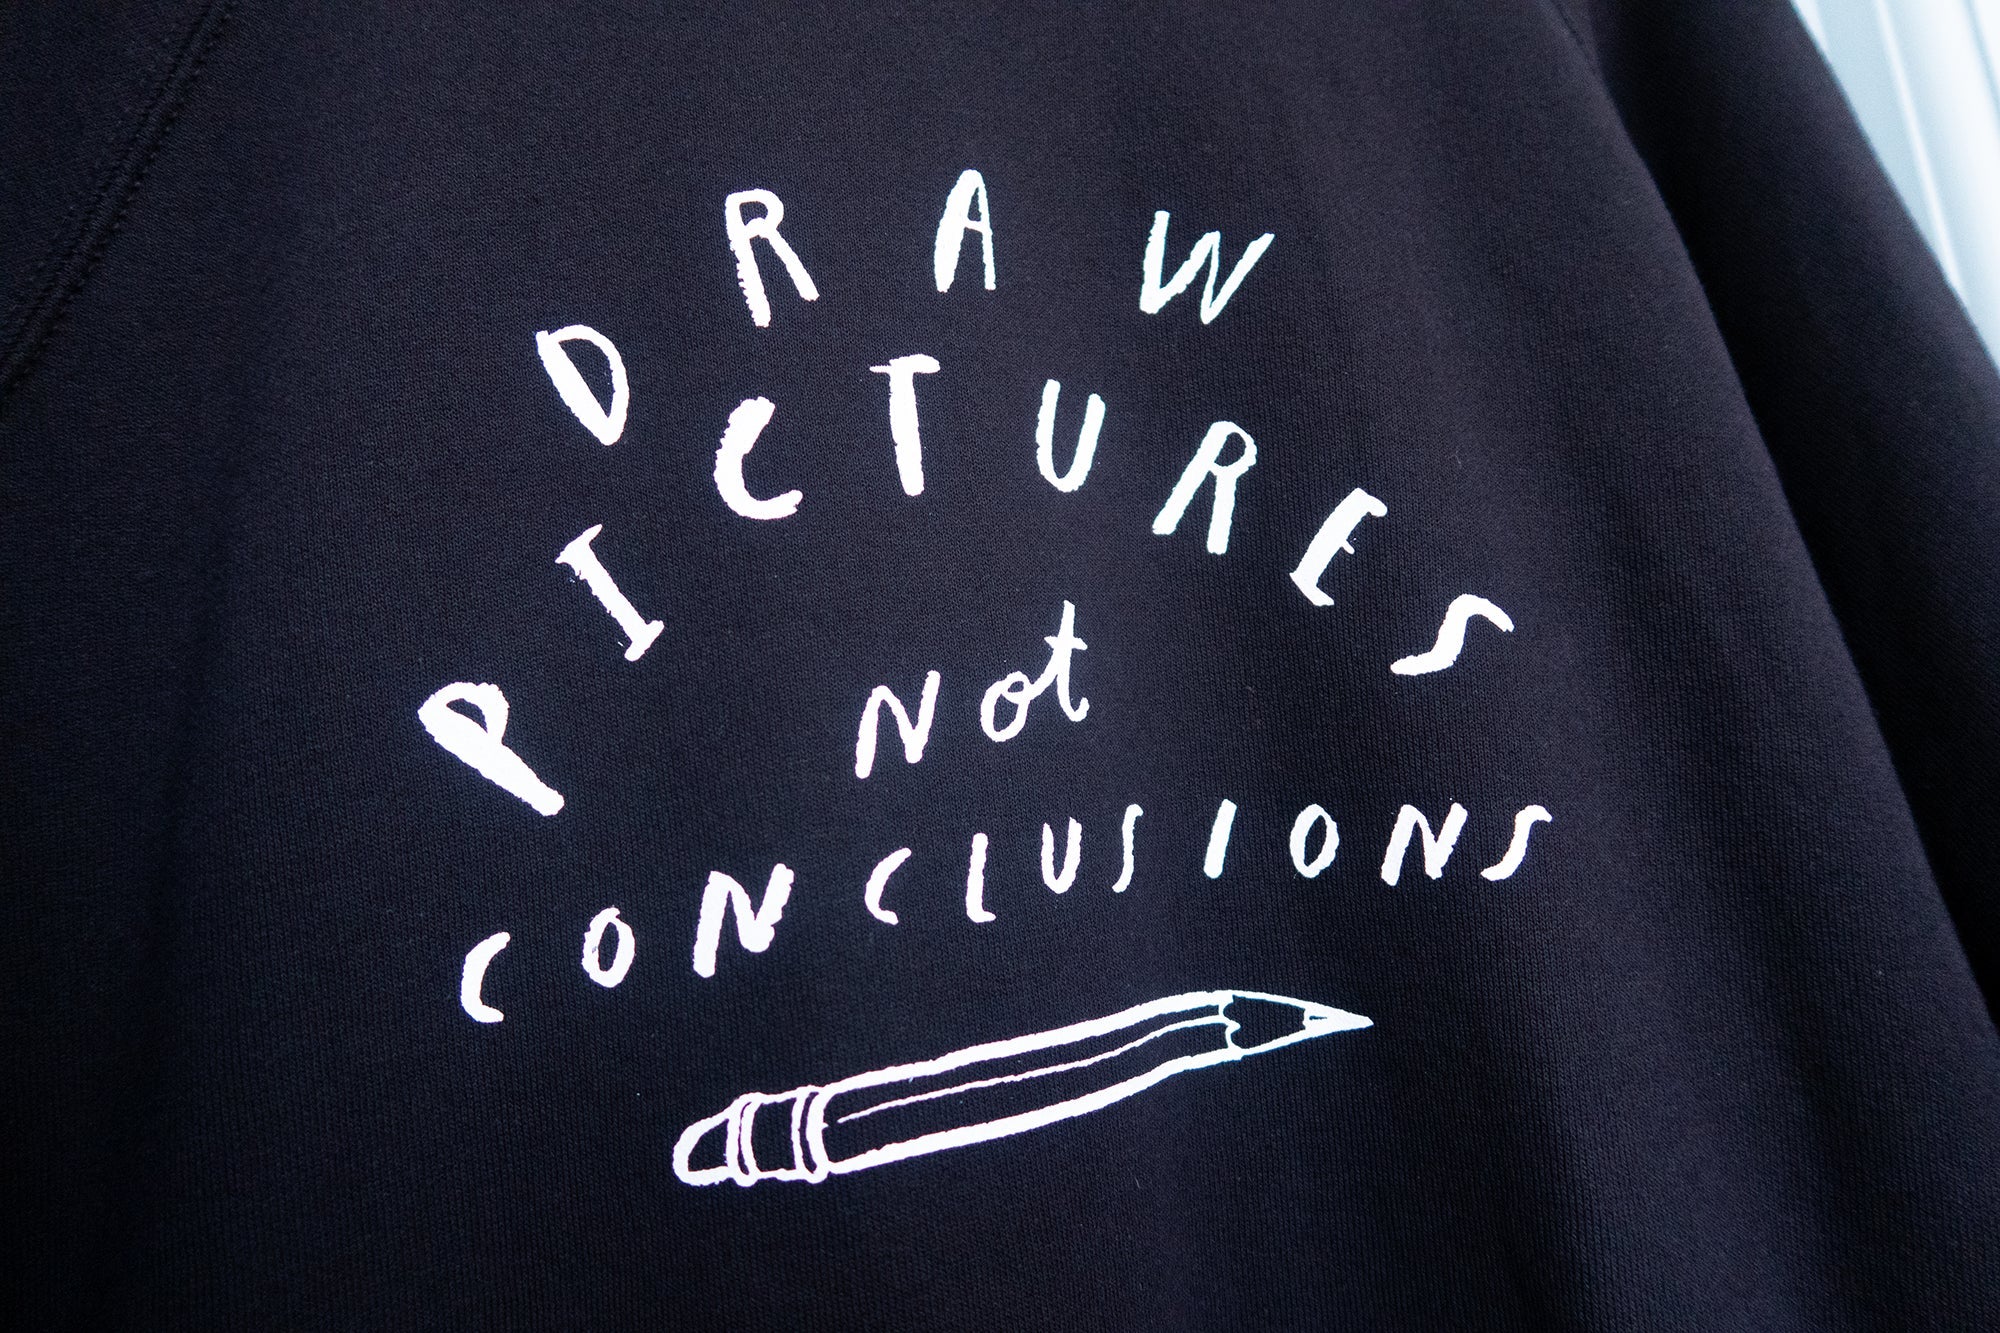 Oliver Jeffers 'Draw Pictures Not Conclusions' Sweatshirt